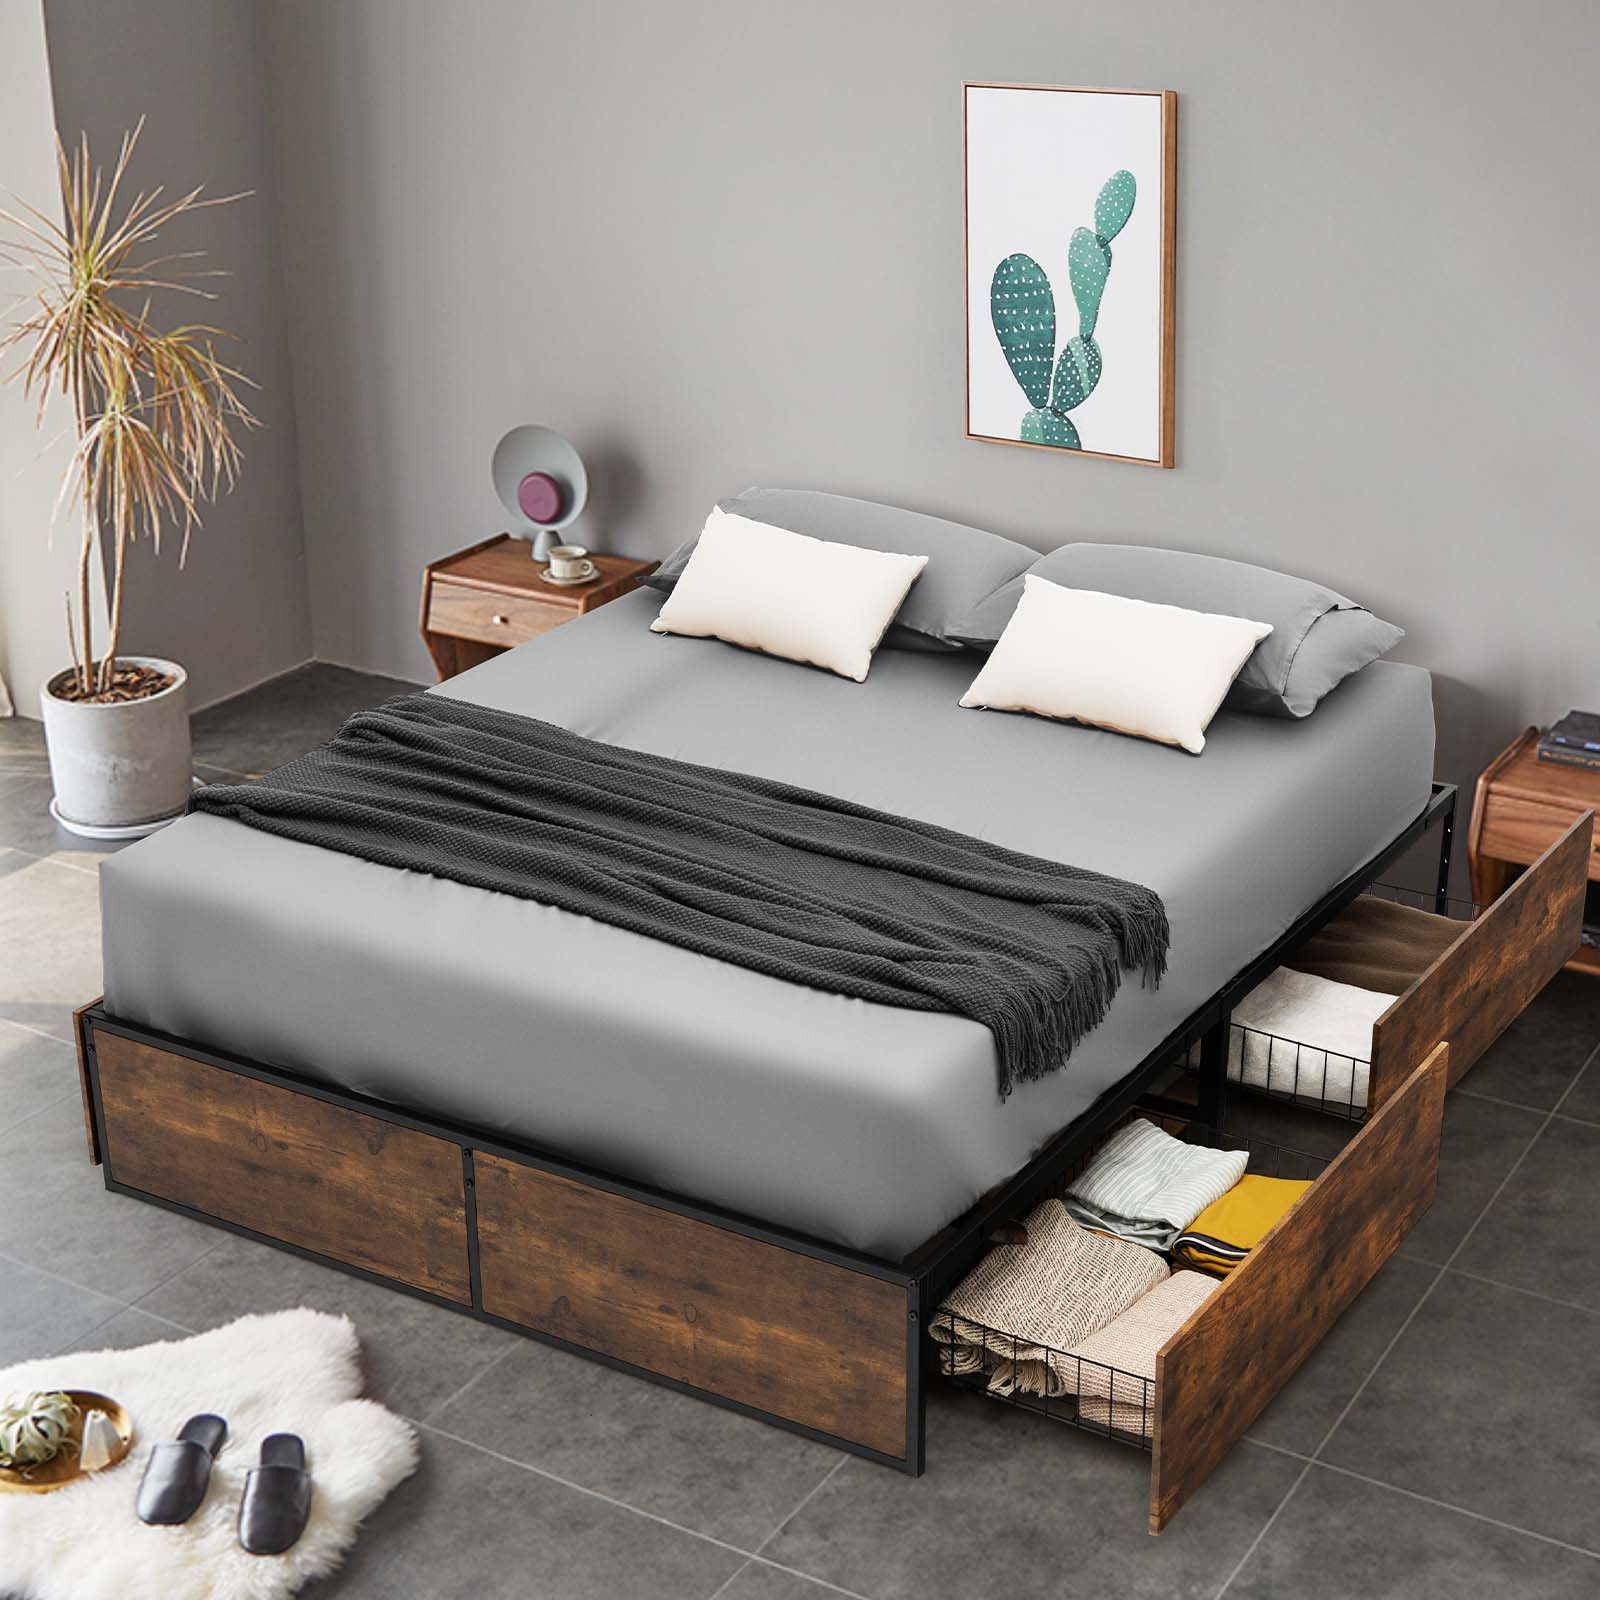 

Costway Full Industrial Platform Bed Frame With 4 Drawers Storage Mattress Foundation